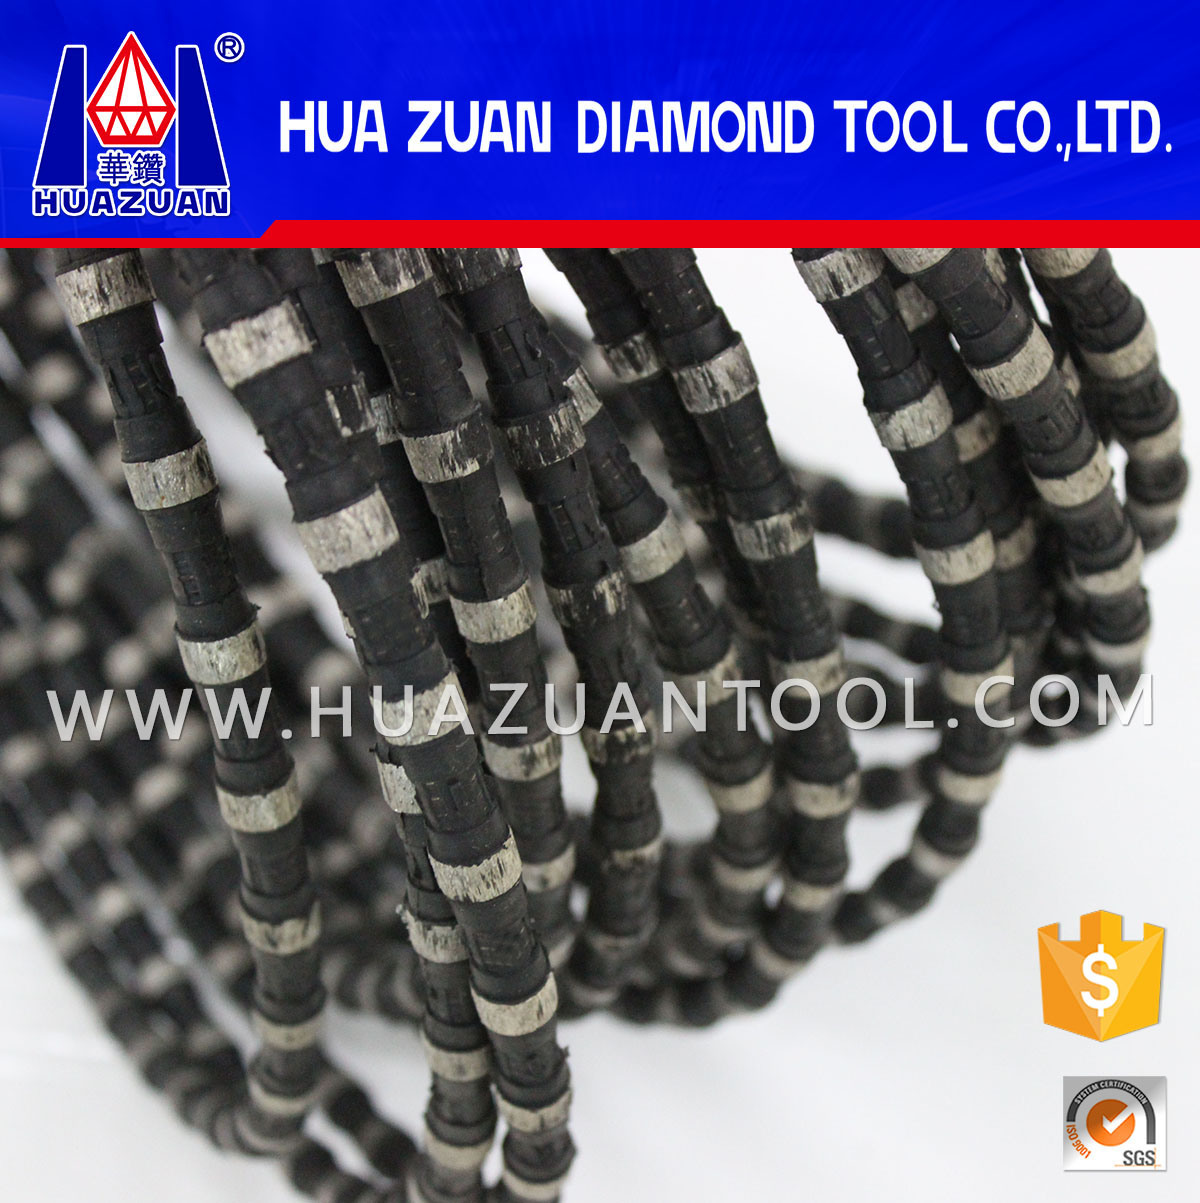 New Black Rubber Diamond Wire for Quarry